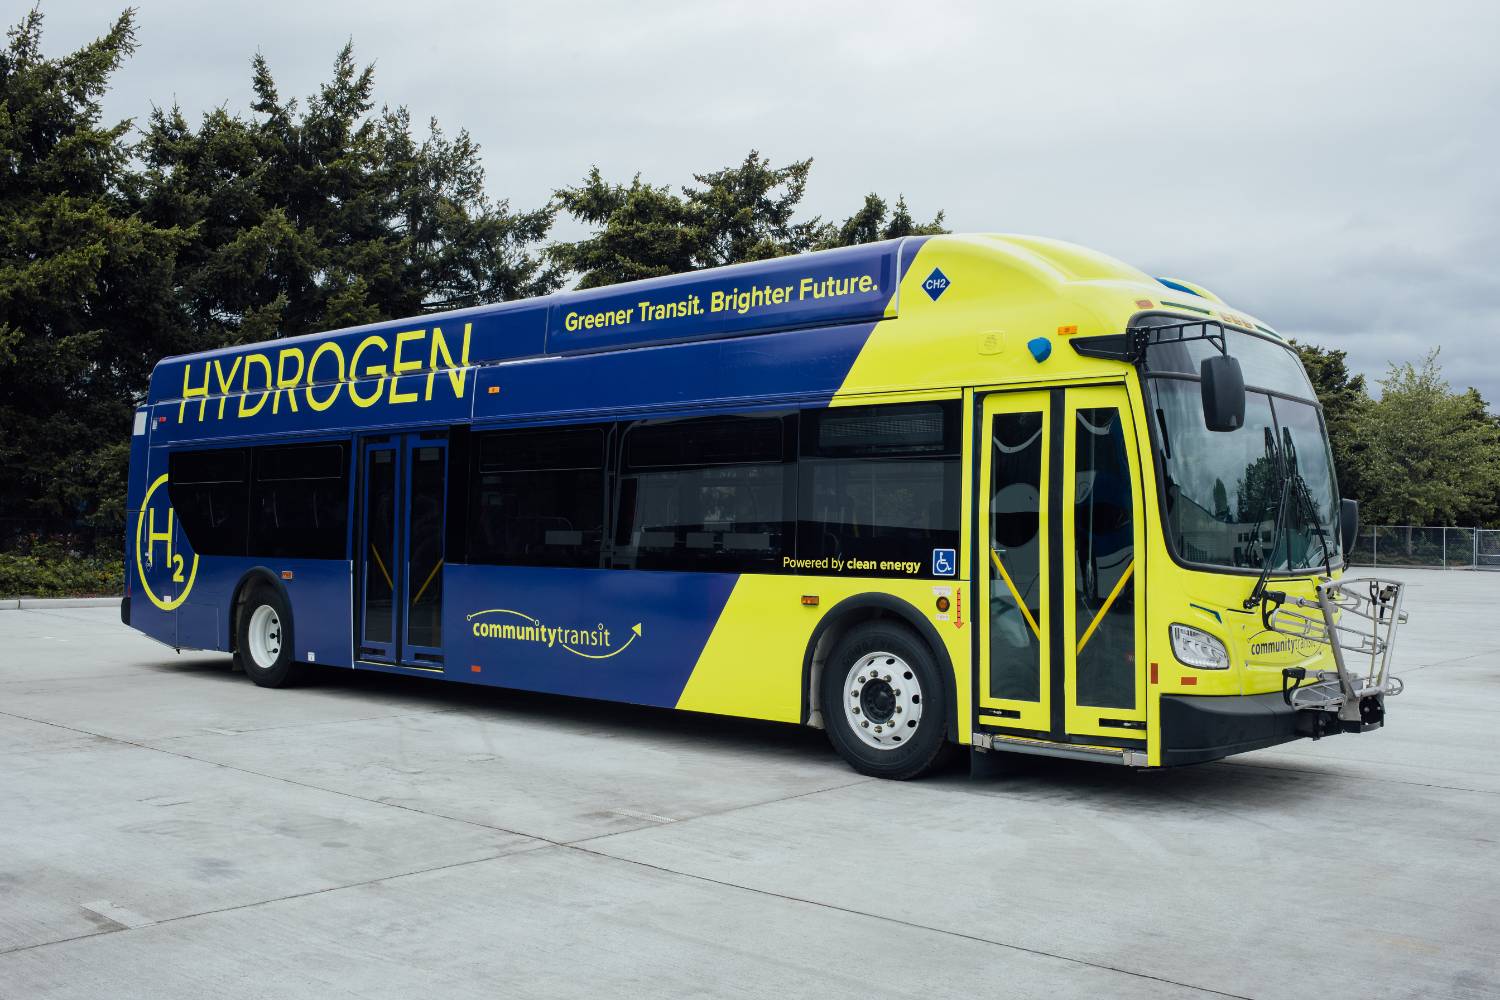 Profile view of Community Transit's Hydrogen Fuel Cell Electric Bus. It is dark blue and yellow green.